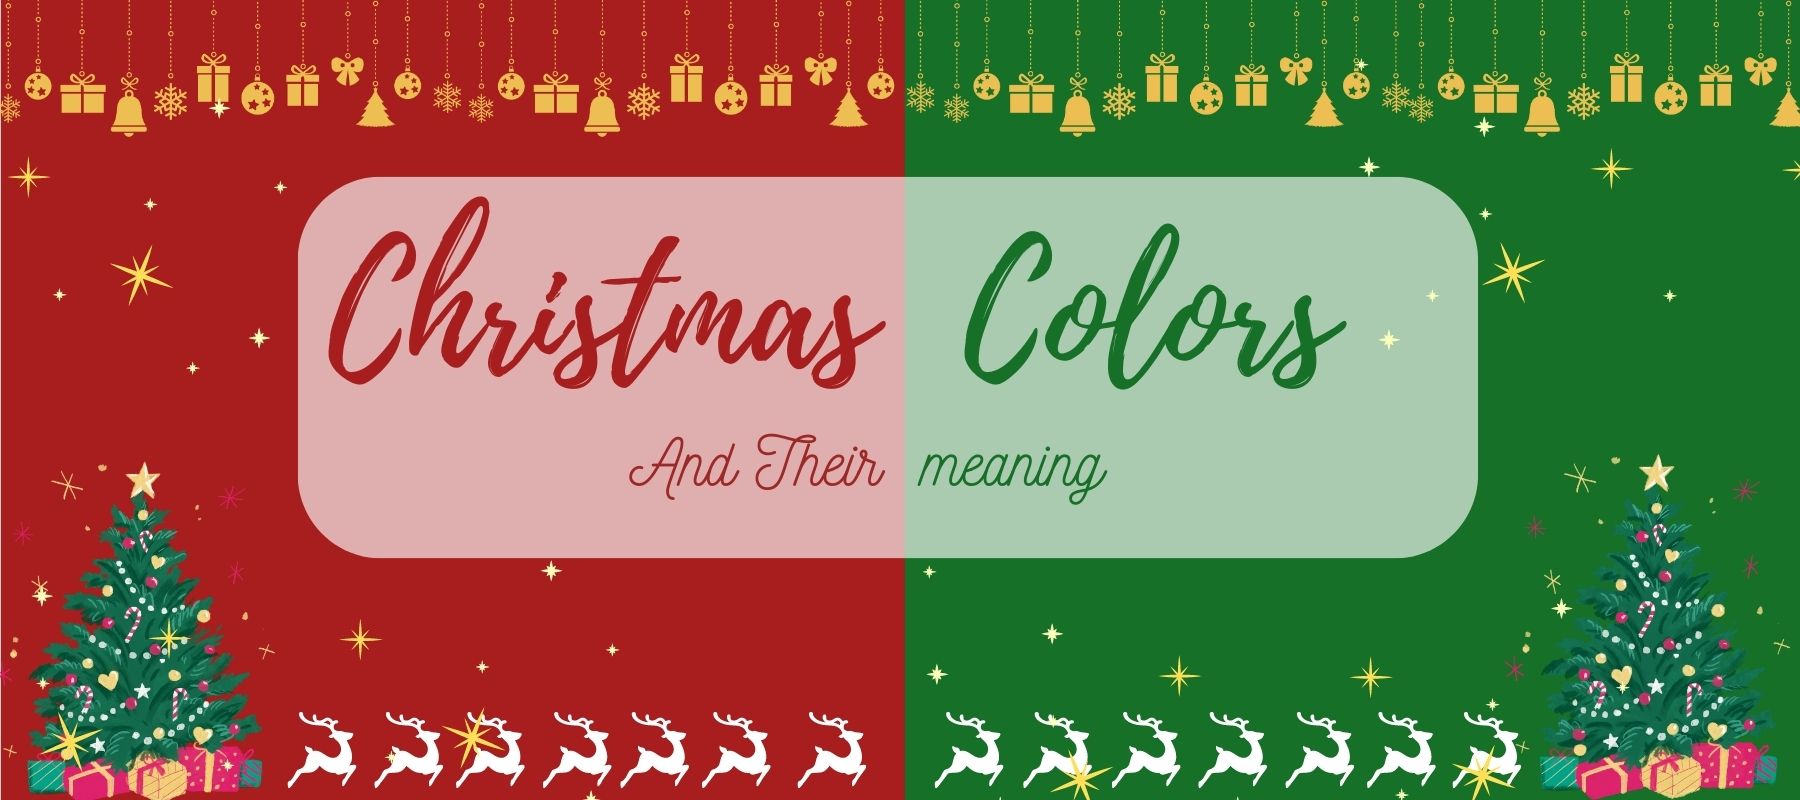 What Are The Colors Of Christmas And What Do They Mean?